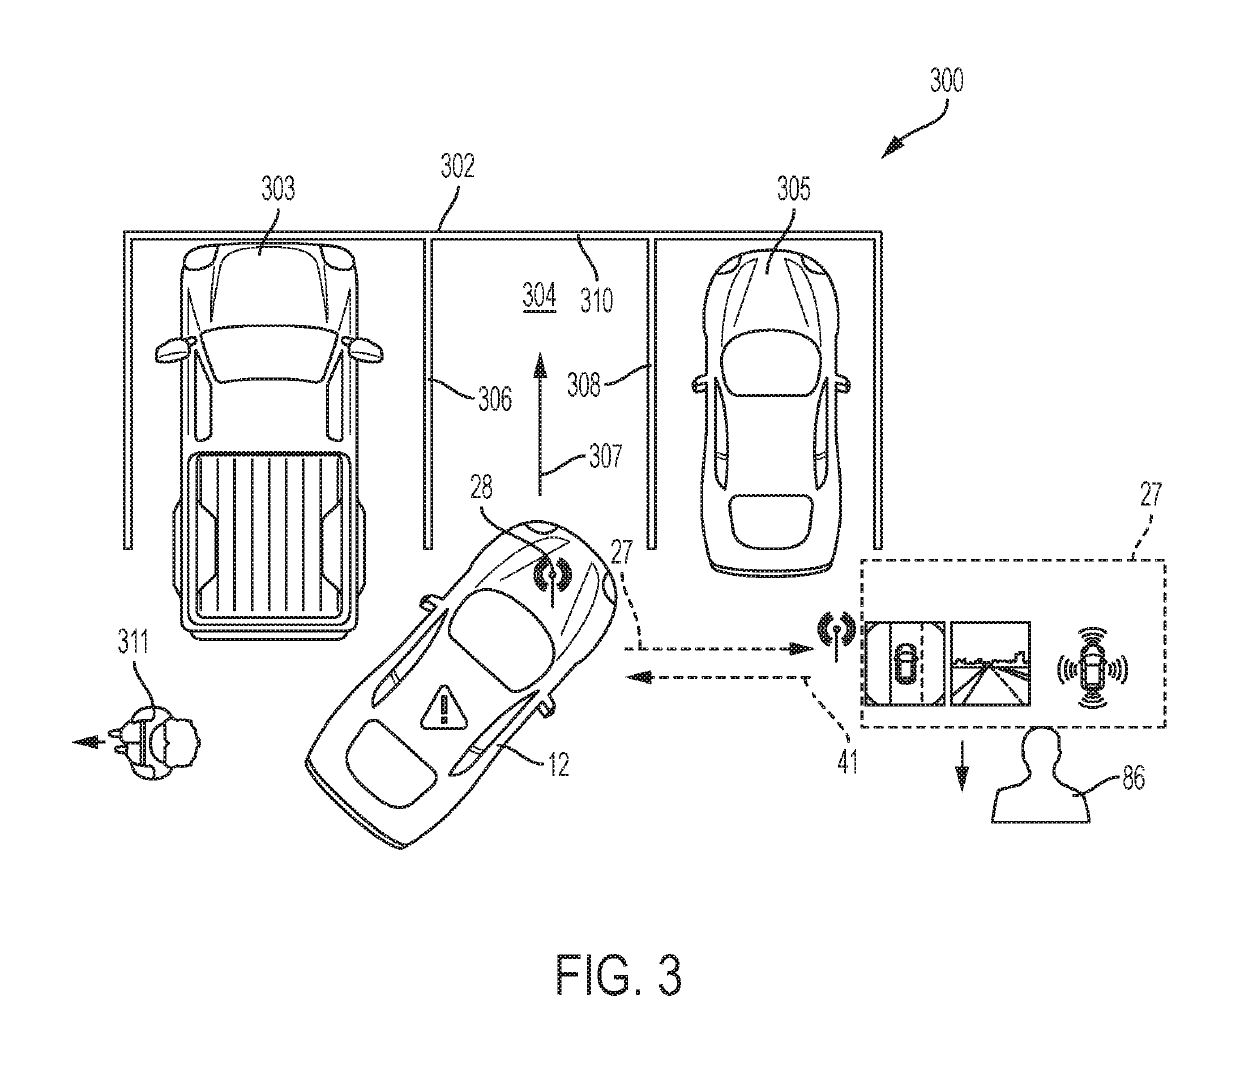 Methods and systems for remote parking assistance